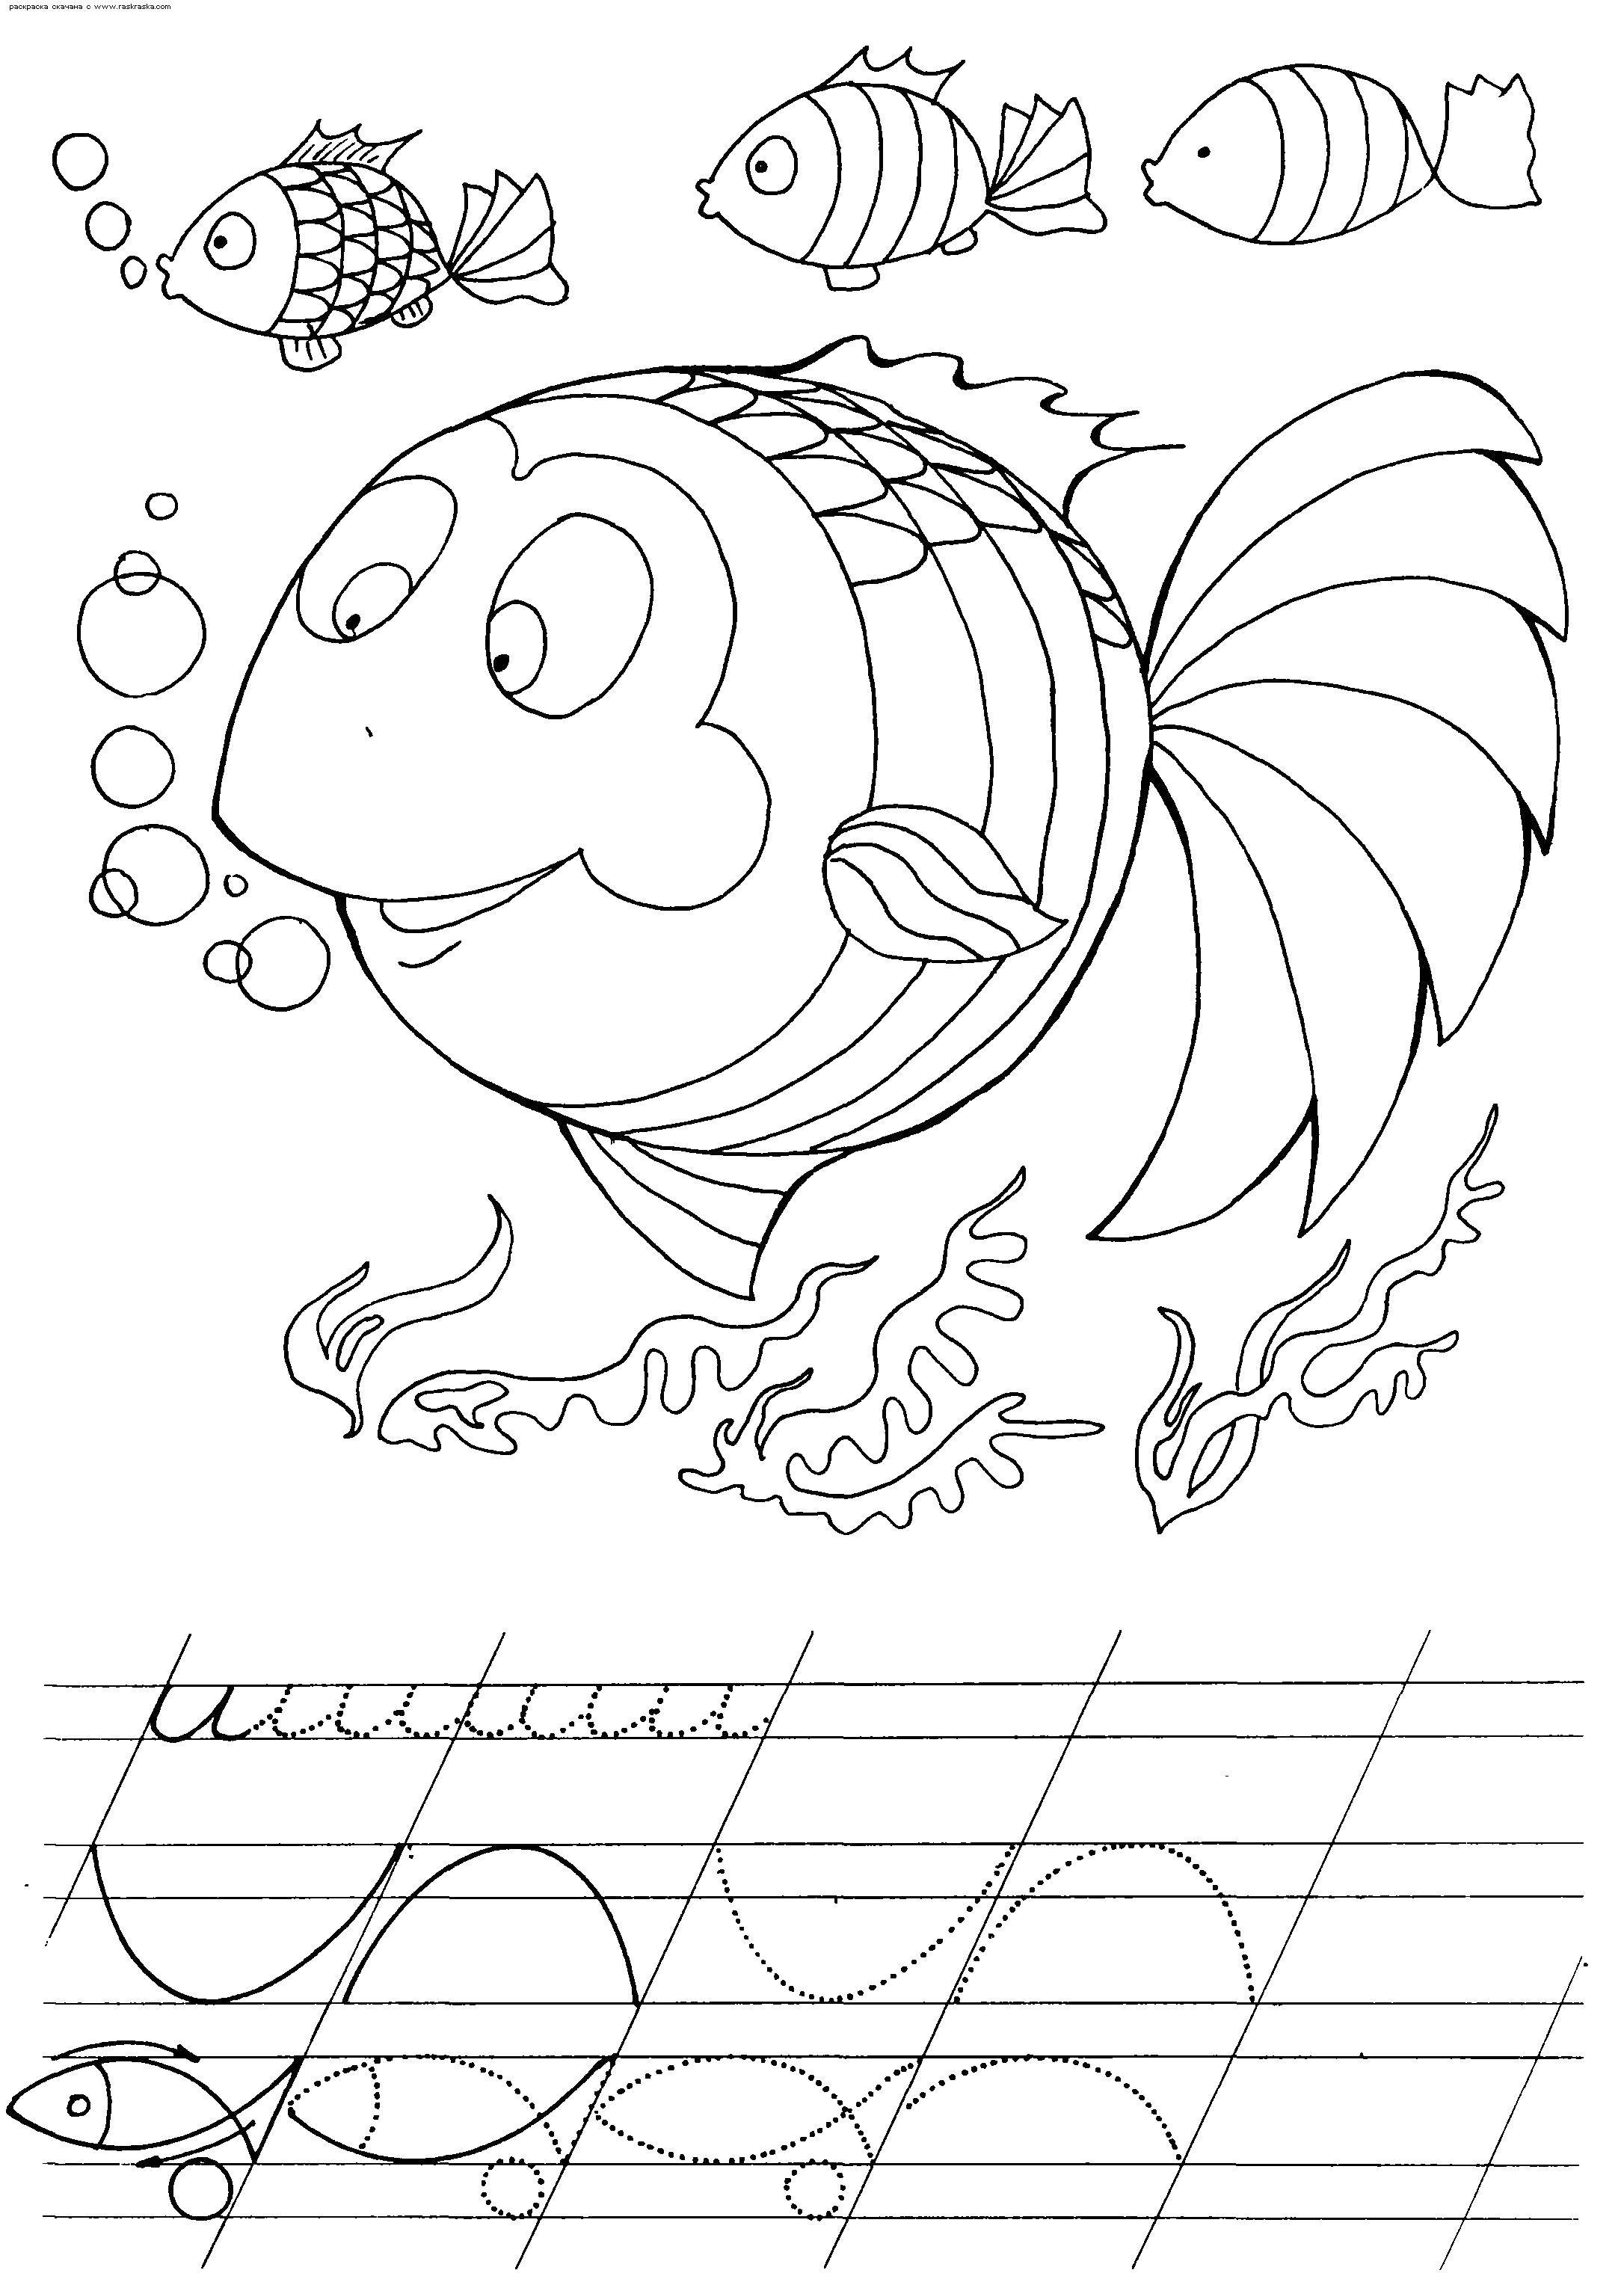 Coloring Recipe with fish. Category fix on the model. Tags:  Cursive, letters.